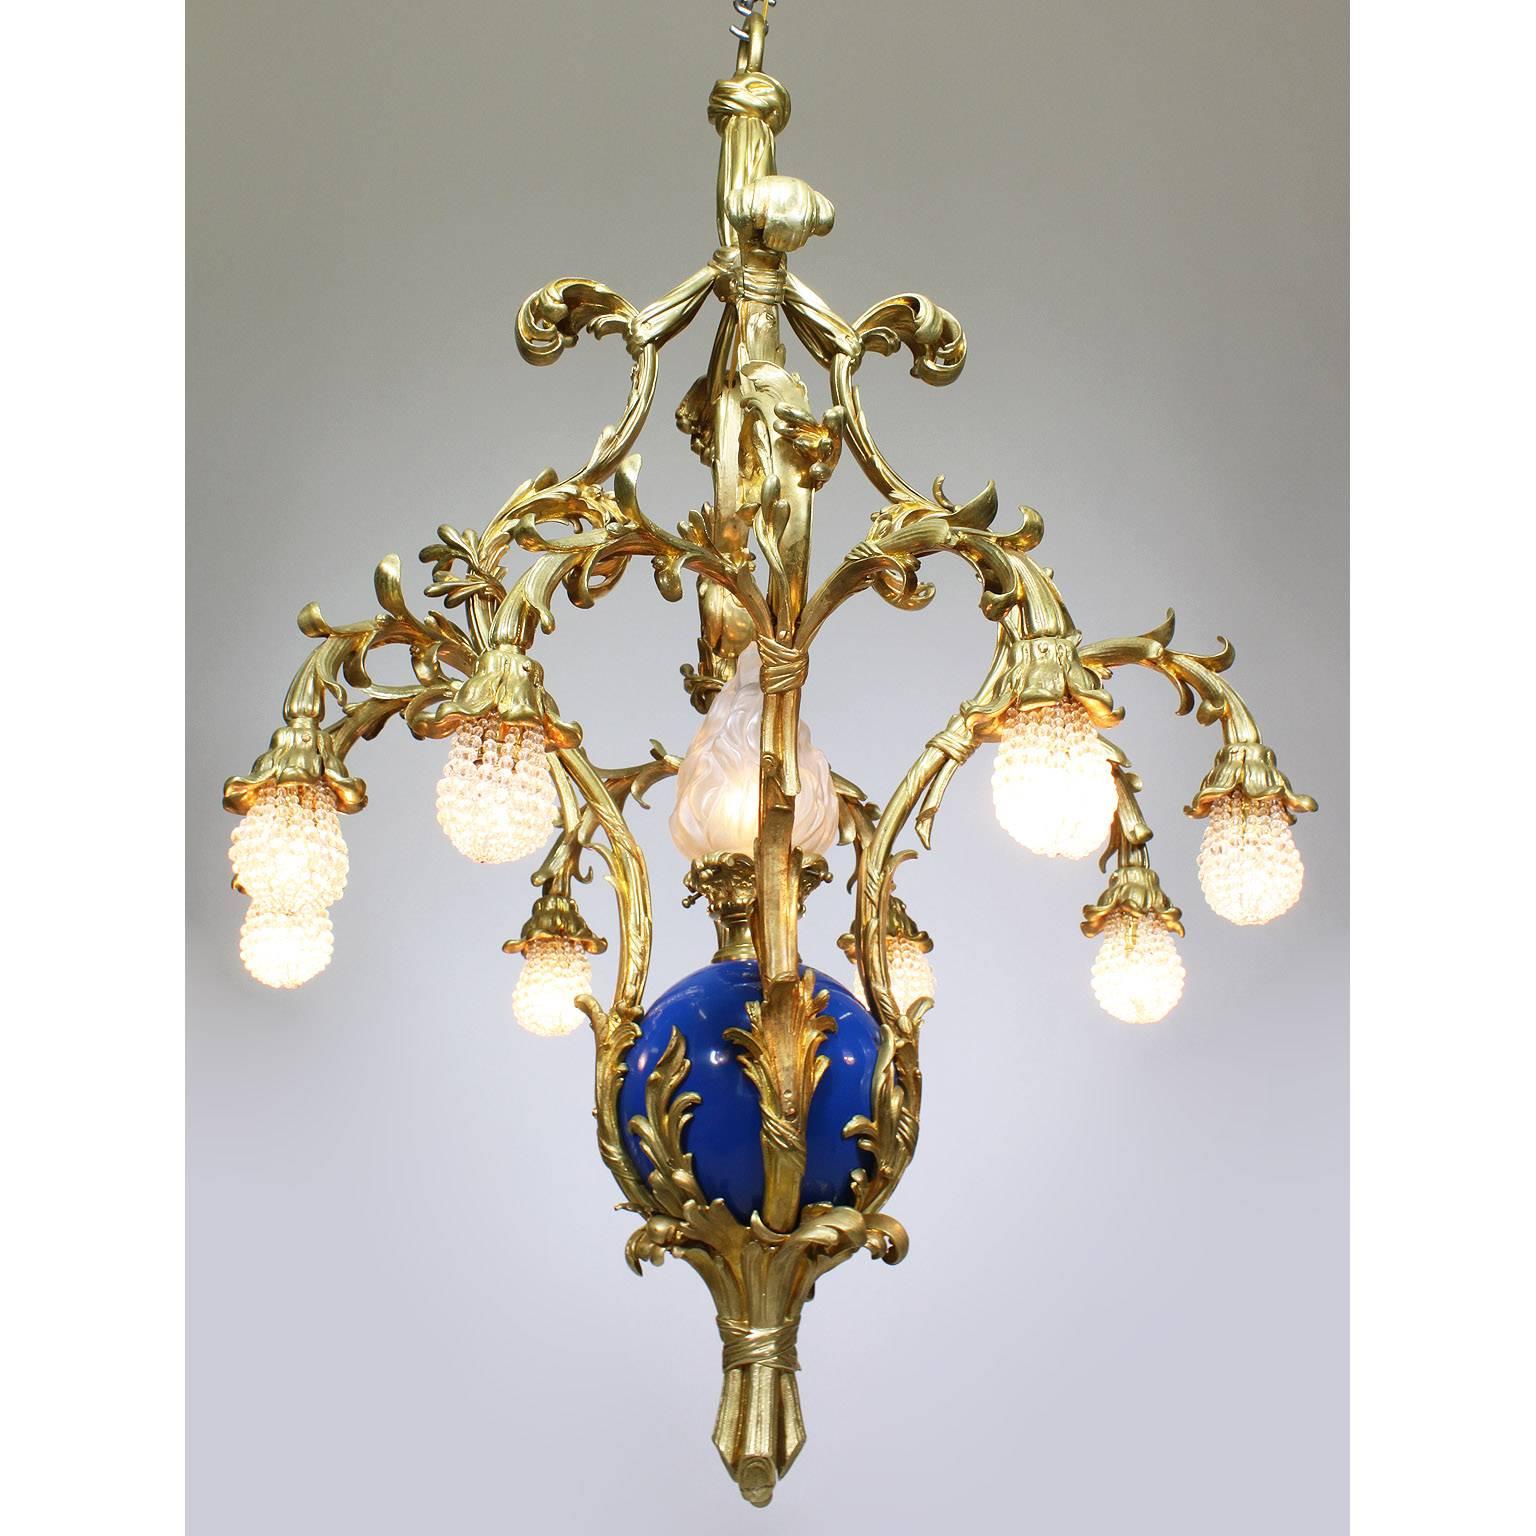 A very fine and rare French Belle Époque 19th-20th century nine-light gilt and enameled bronze 